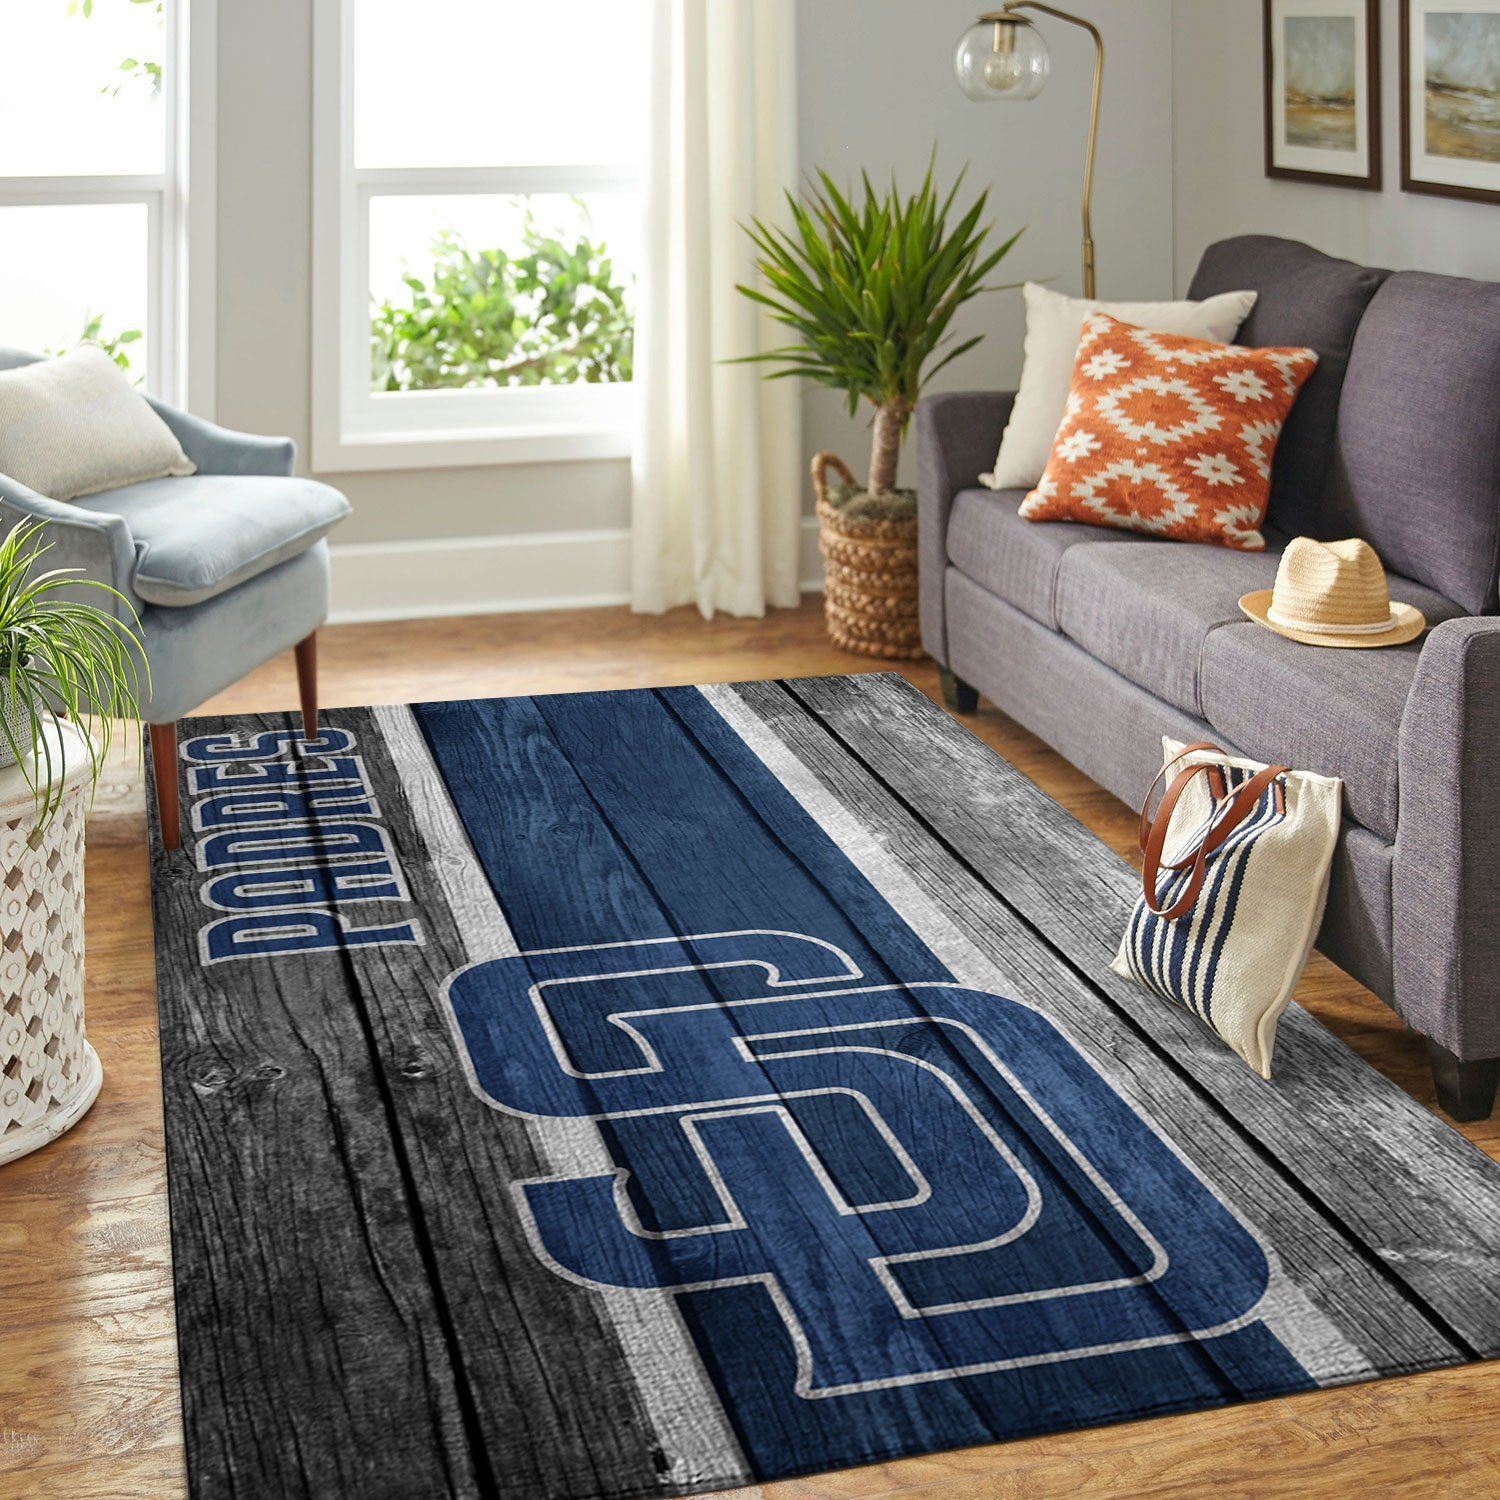 San Diego Padres Mlb Team Logo Wooden Style Style Nice Gift Home Decor Rectangle Area Rug - Indoor Outdoor Rugs